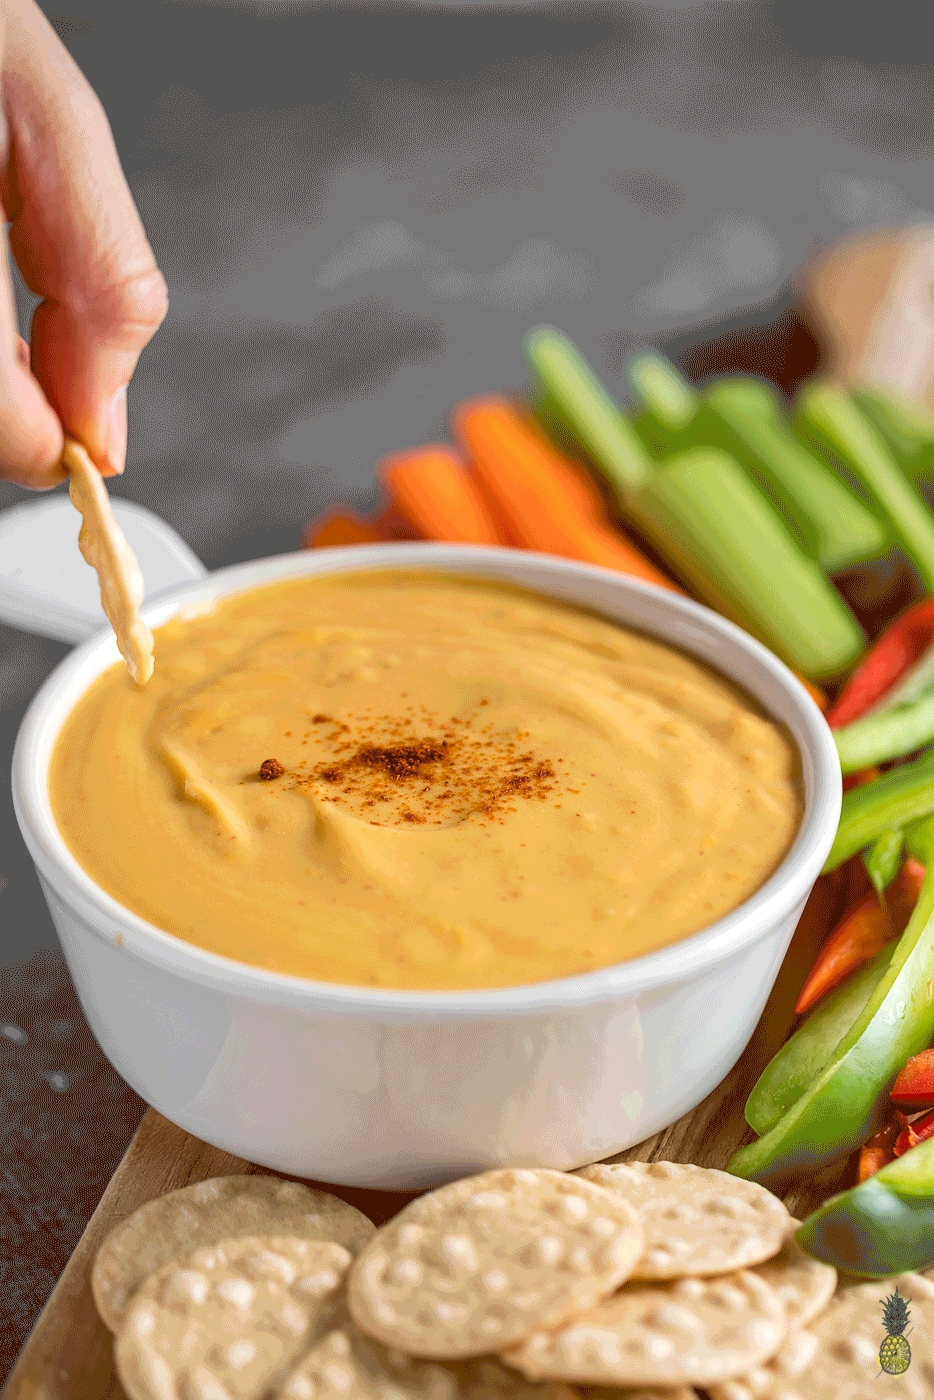 Make The Best Vegan Chipotle Cheddar Cheese Sauce that is Healthy & Oil-free! #vegancheese #vegancheddar #healthycheese #cheesesauce #superbowl #cheddarcheese #oilfree #lowfat #healthy